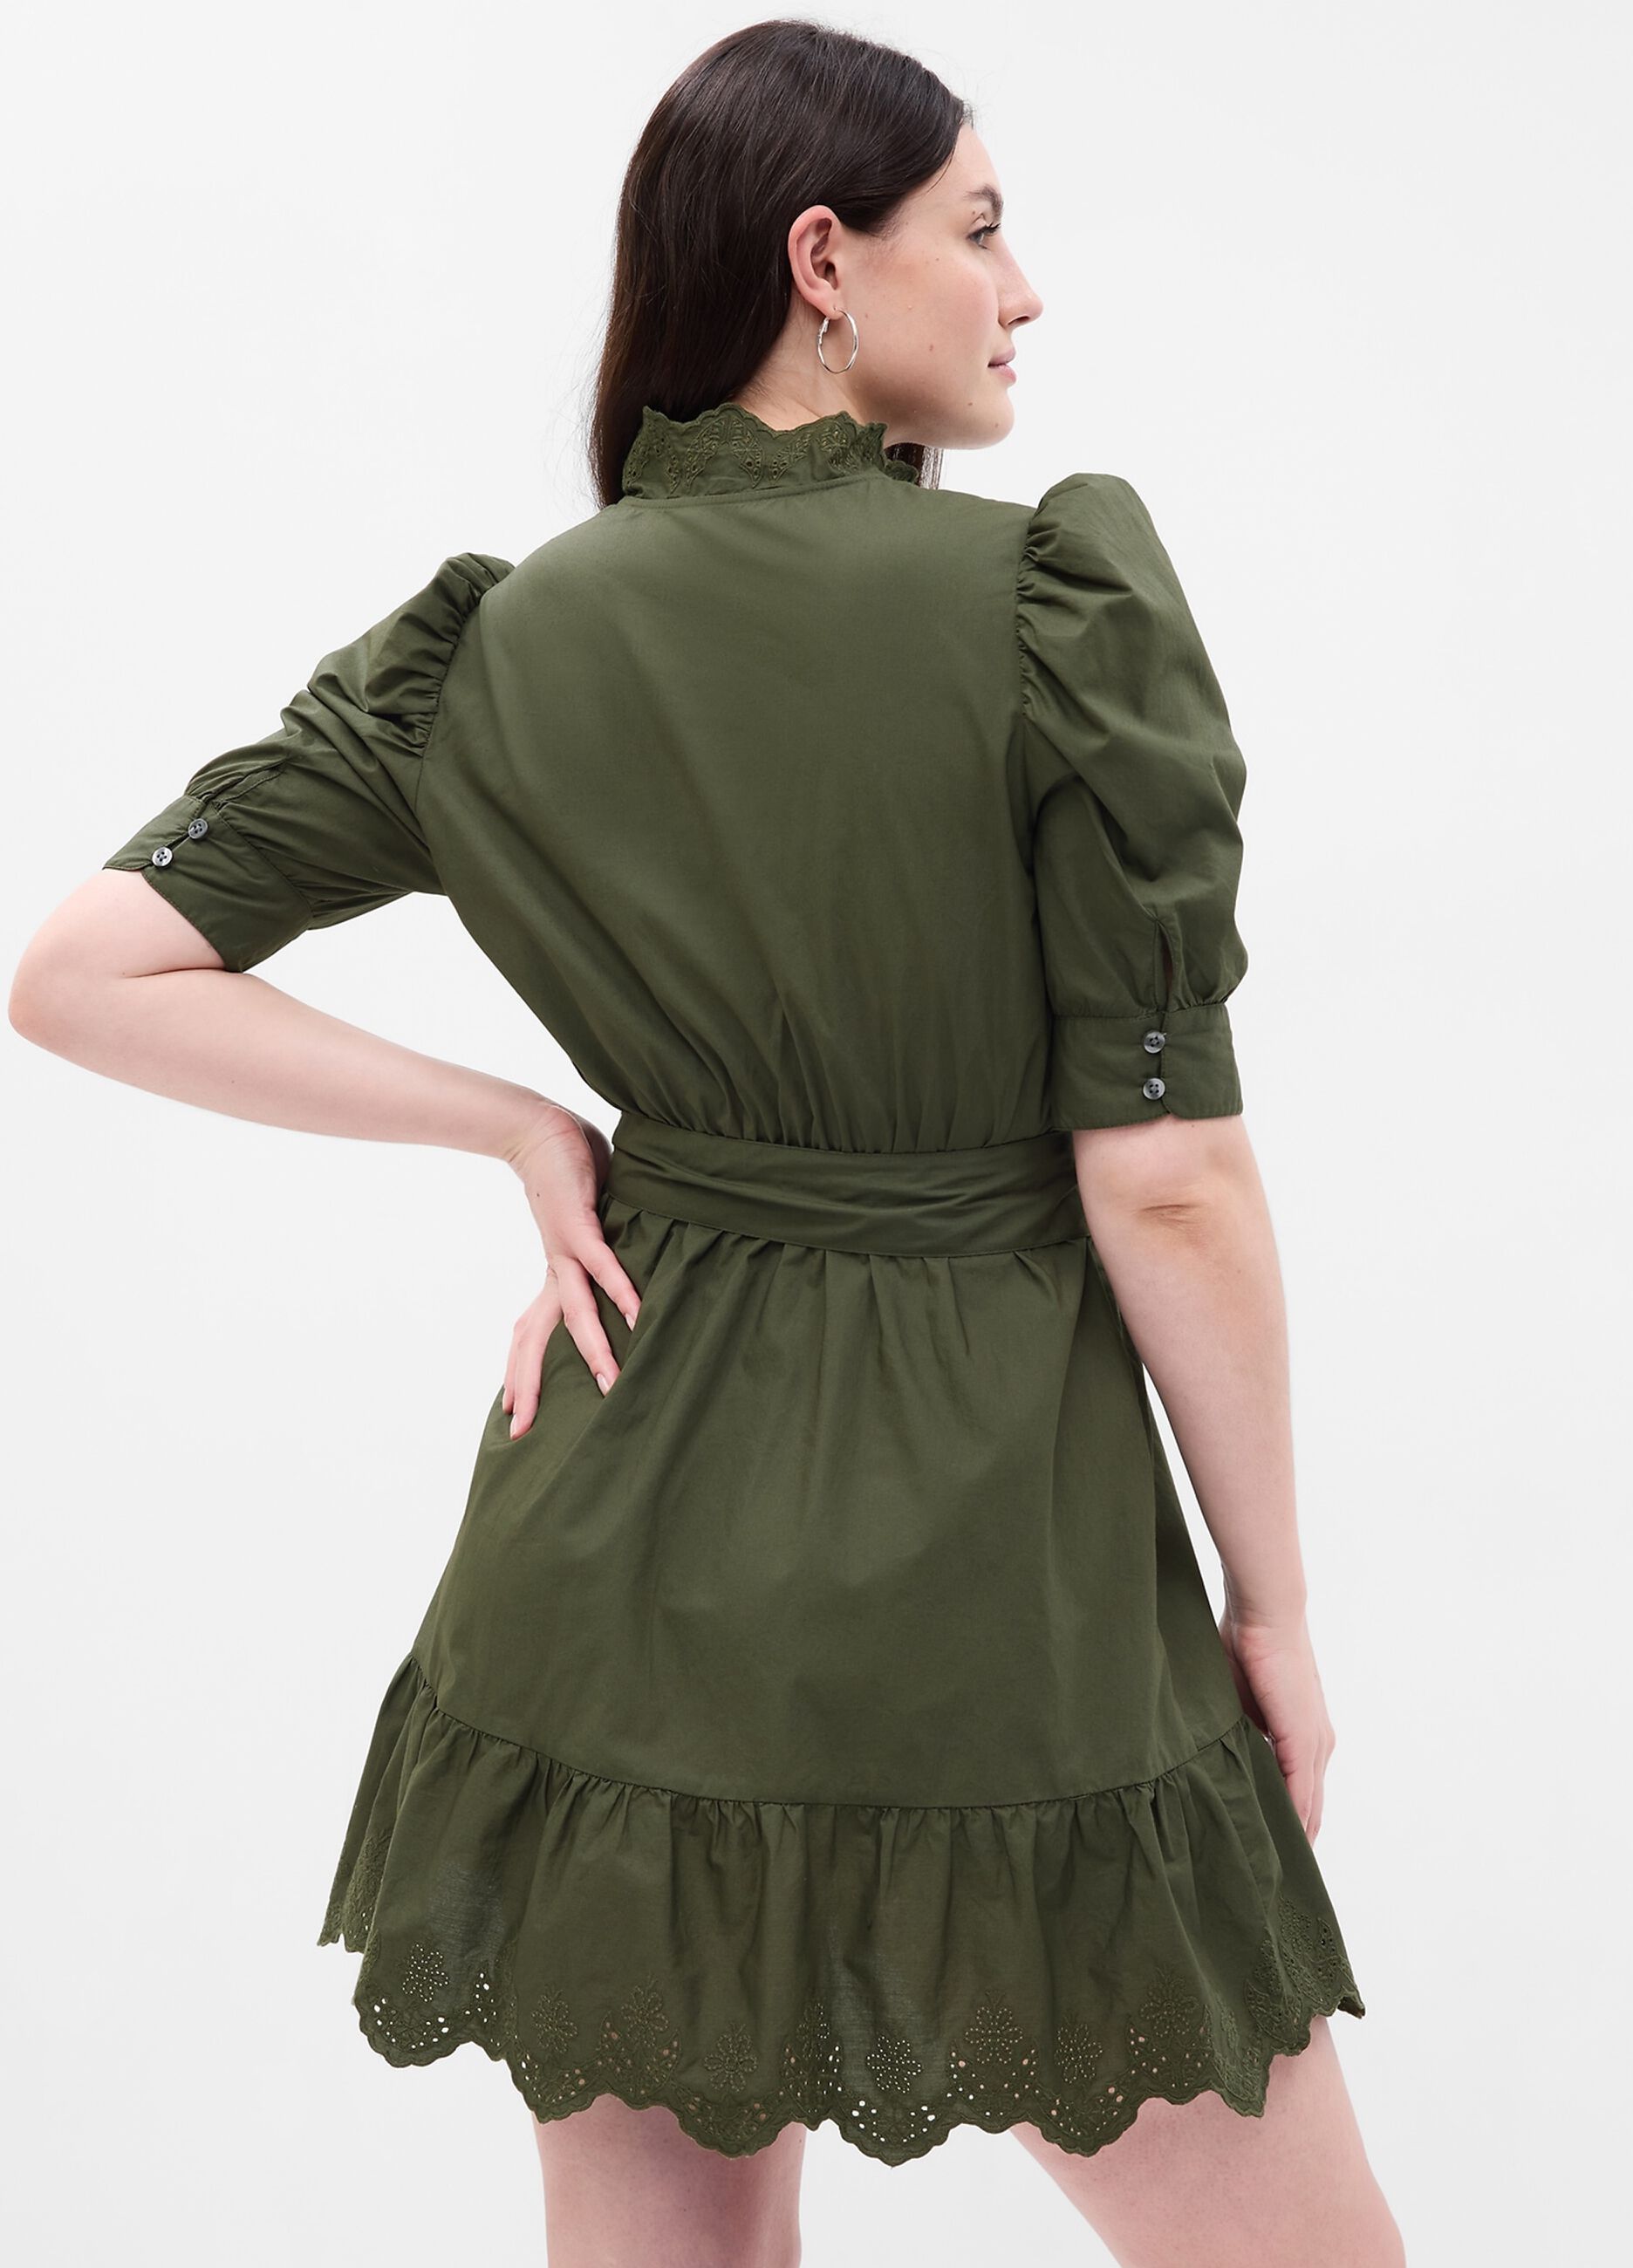 Shirt dress with broderie anglaise details